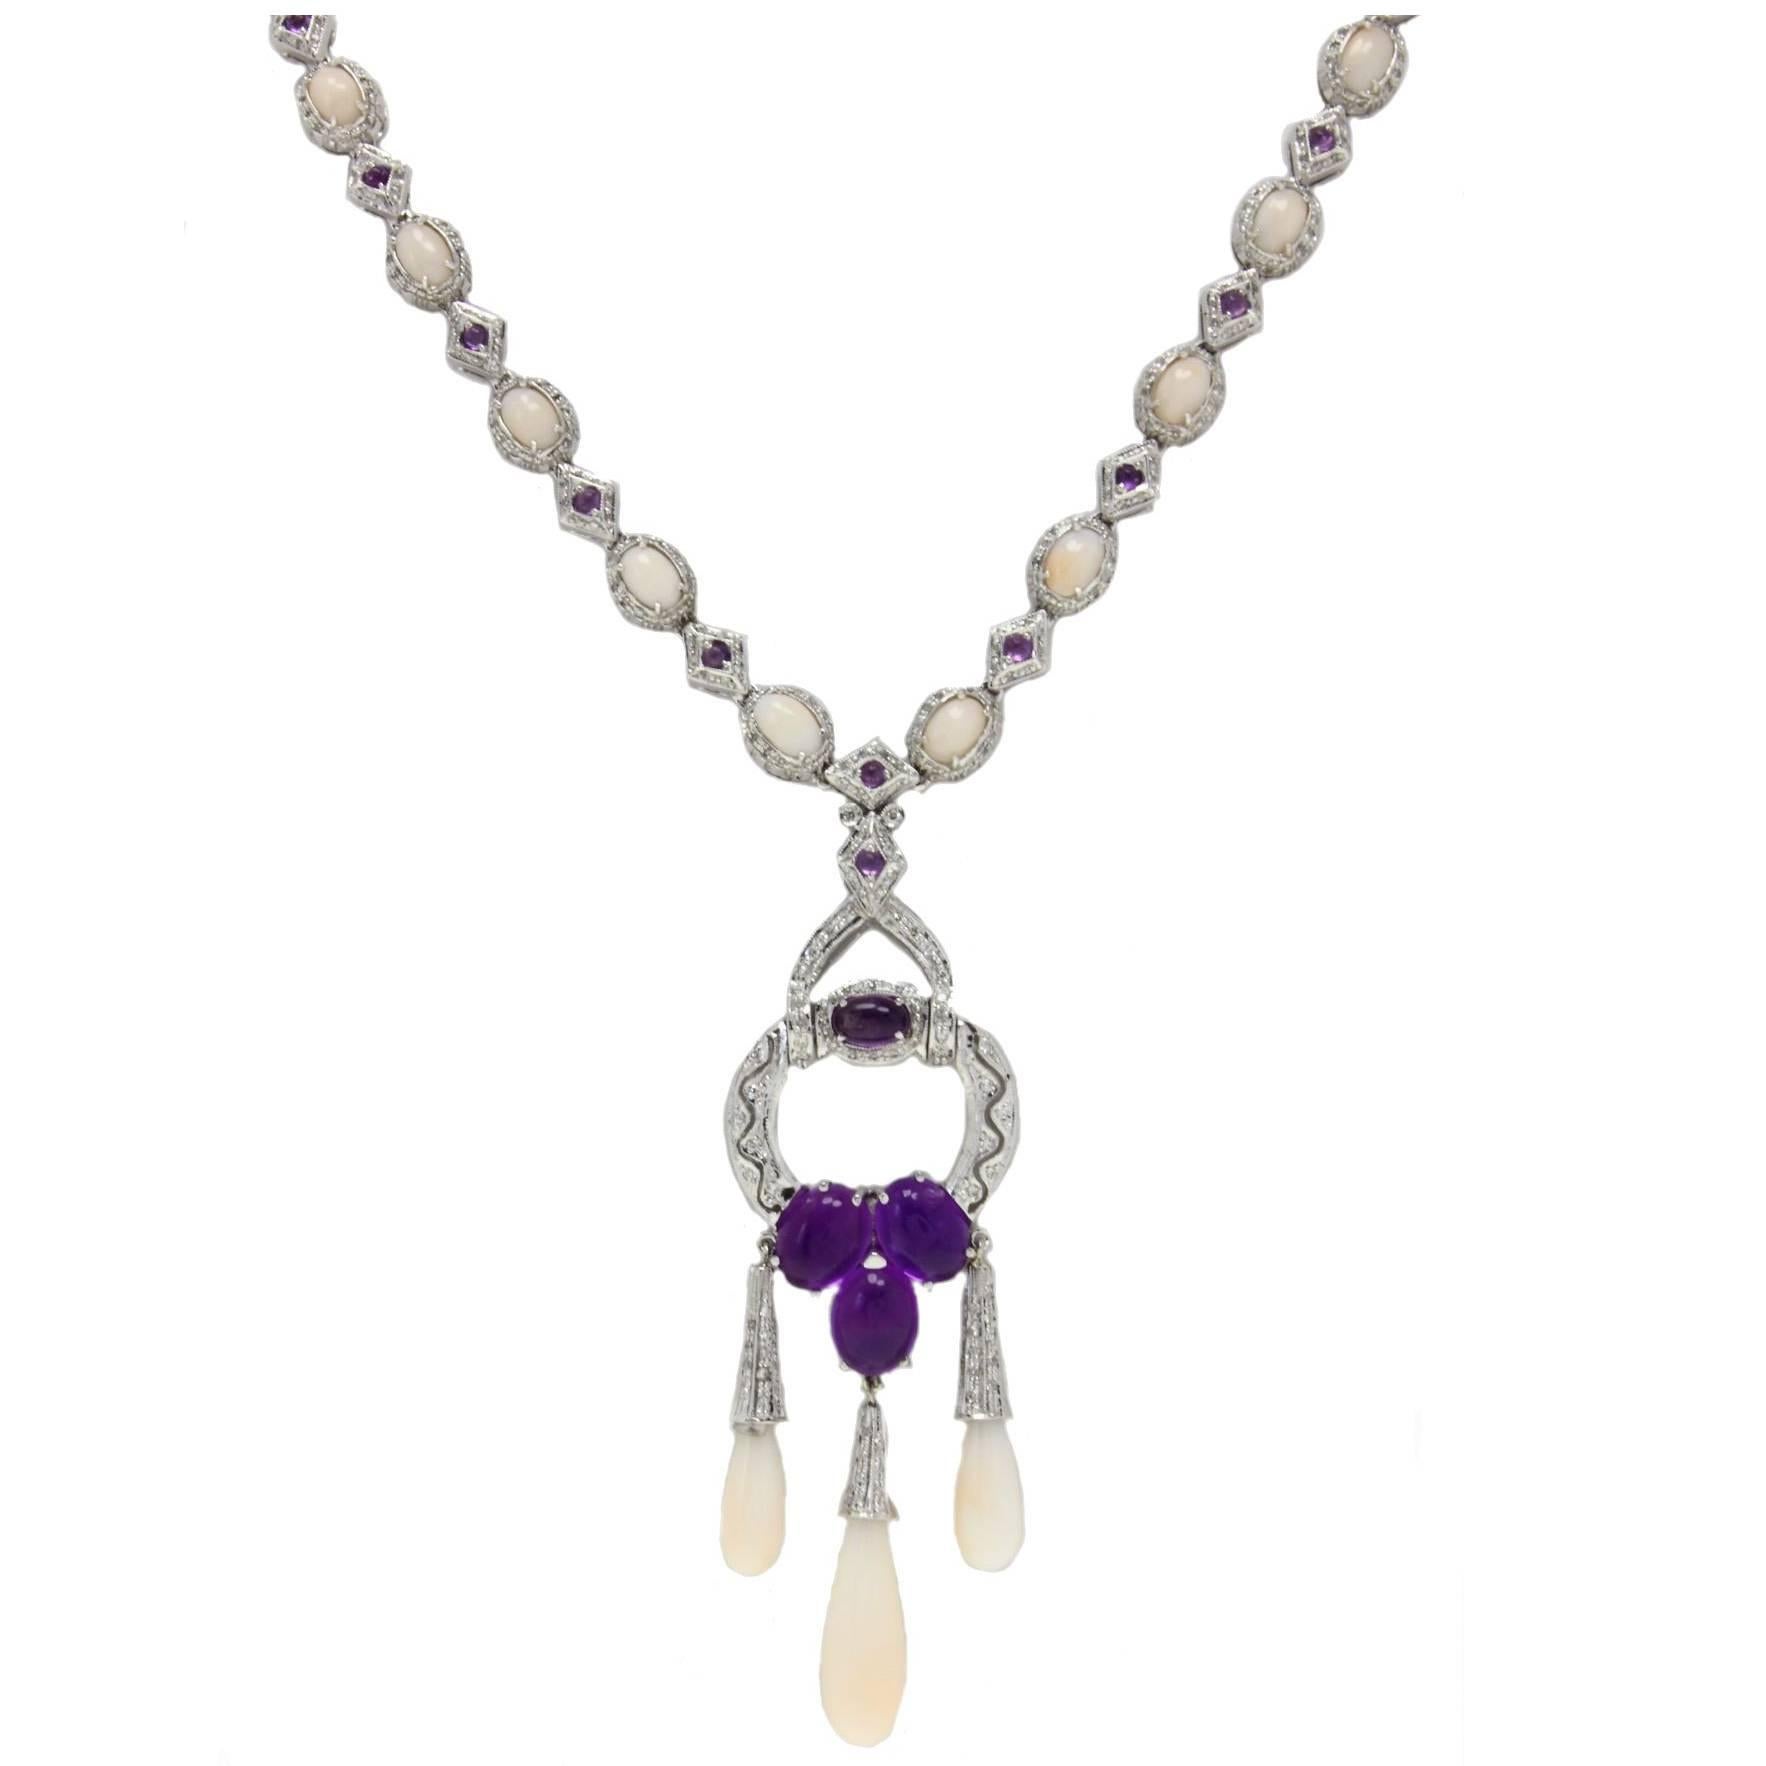 Diamonds, Amethysts, Pink Coral  Buttons and Drops, White Gold Link Retrò Necklace